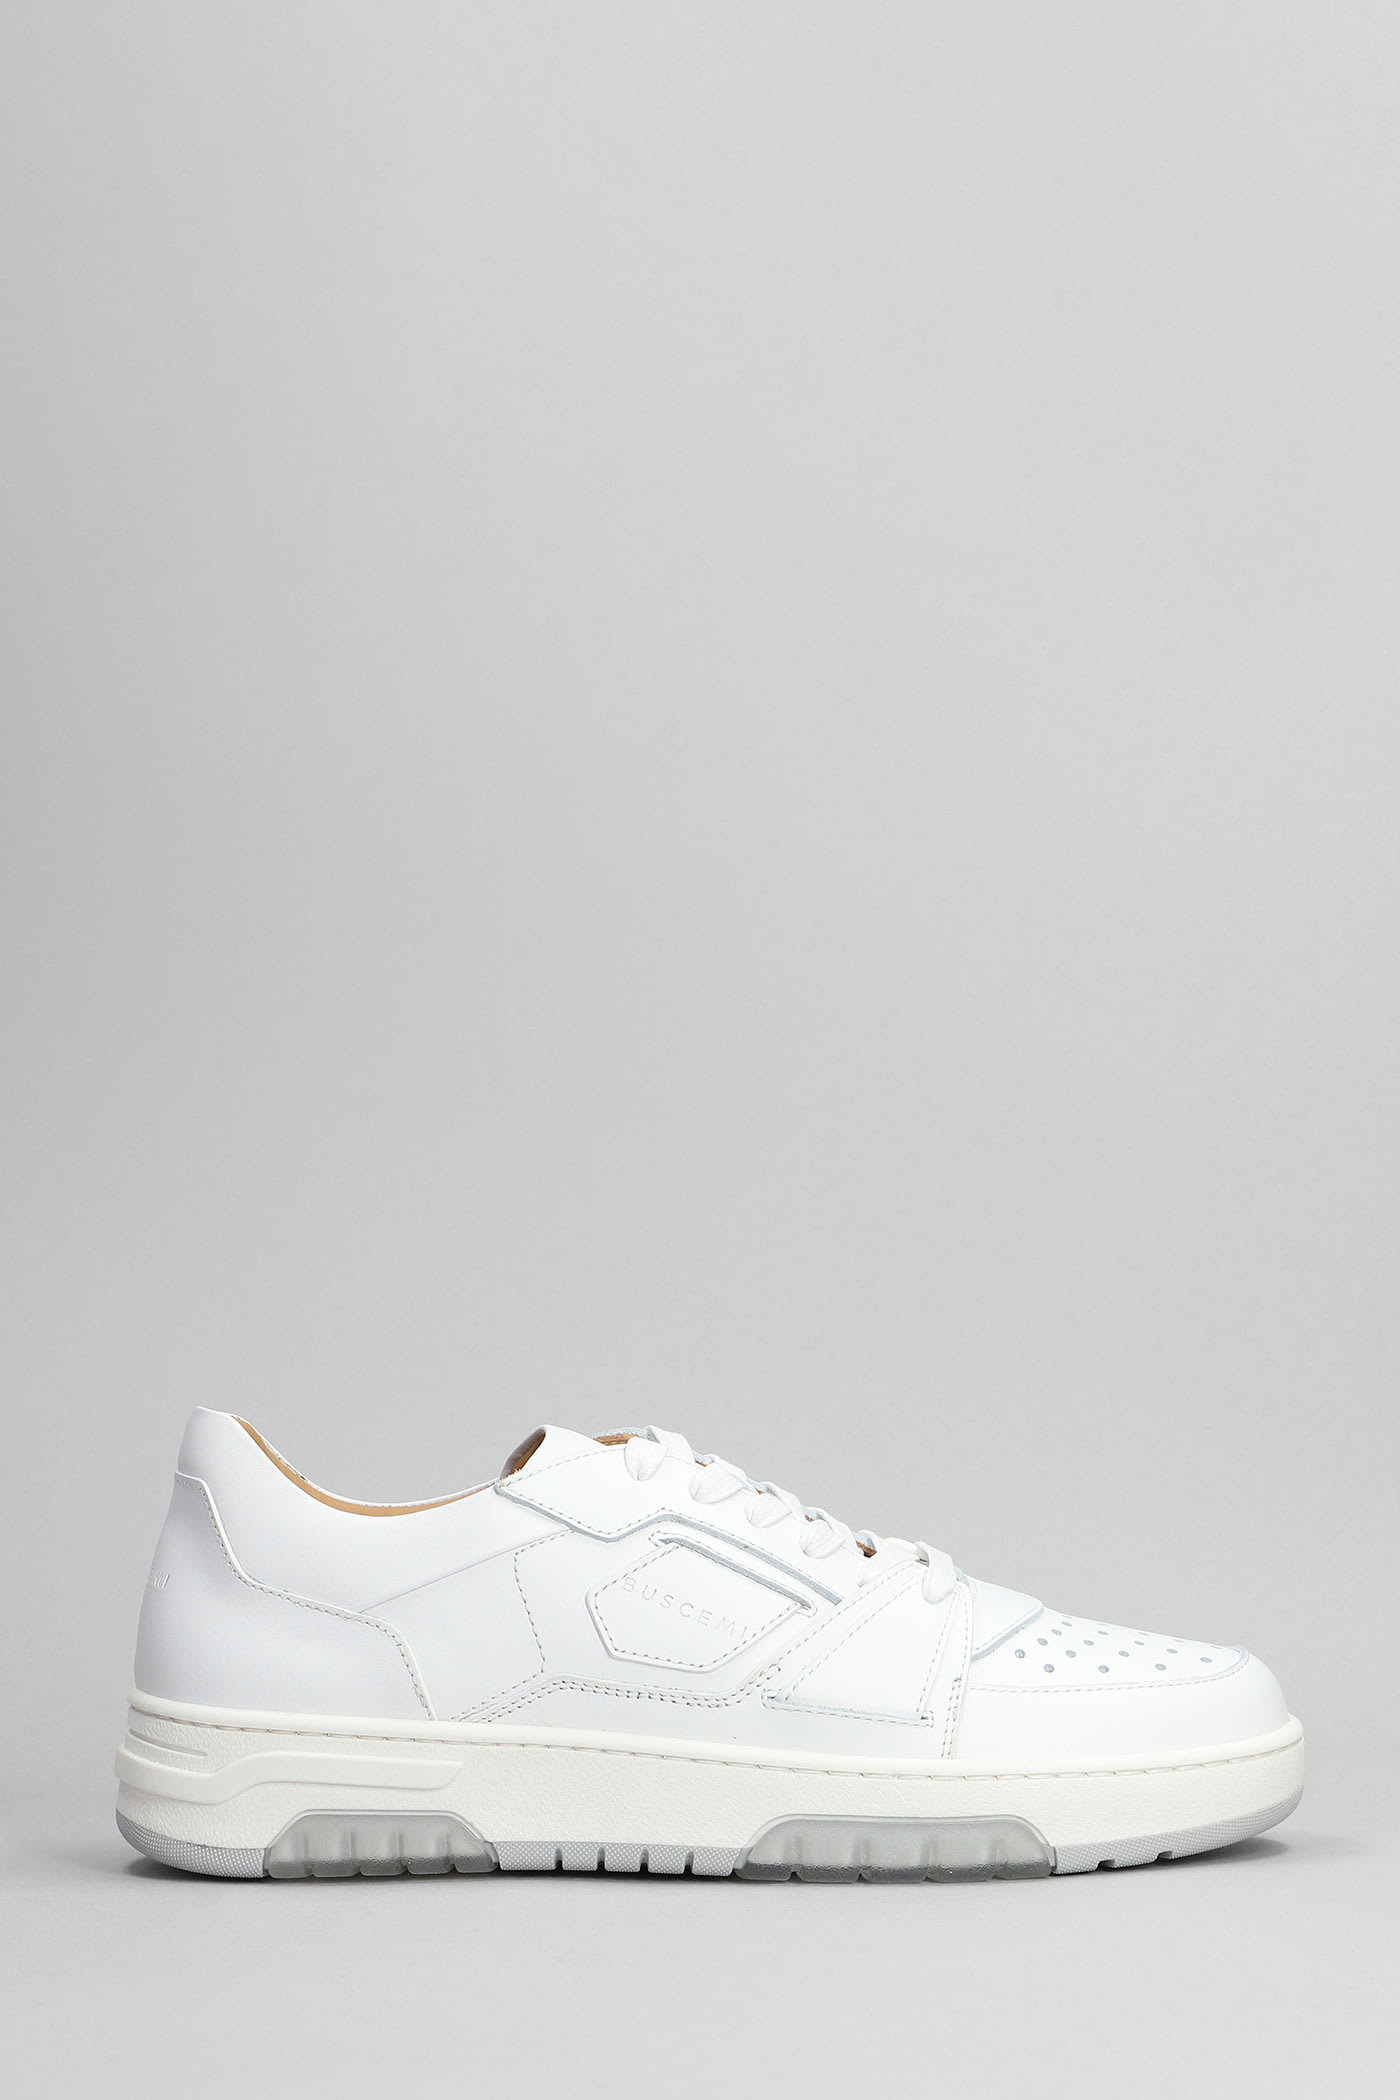 Buscemi Jf1 Sneakers In White Leather